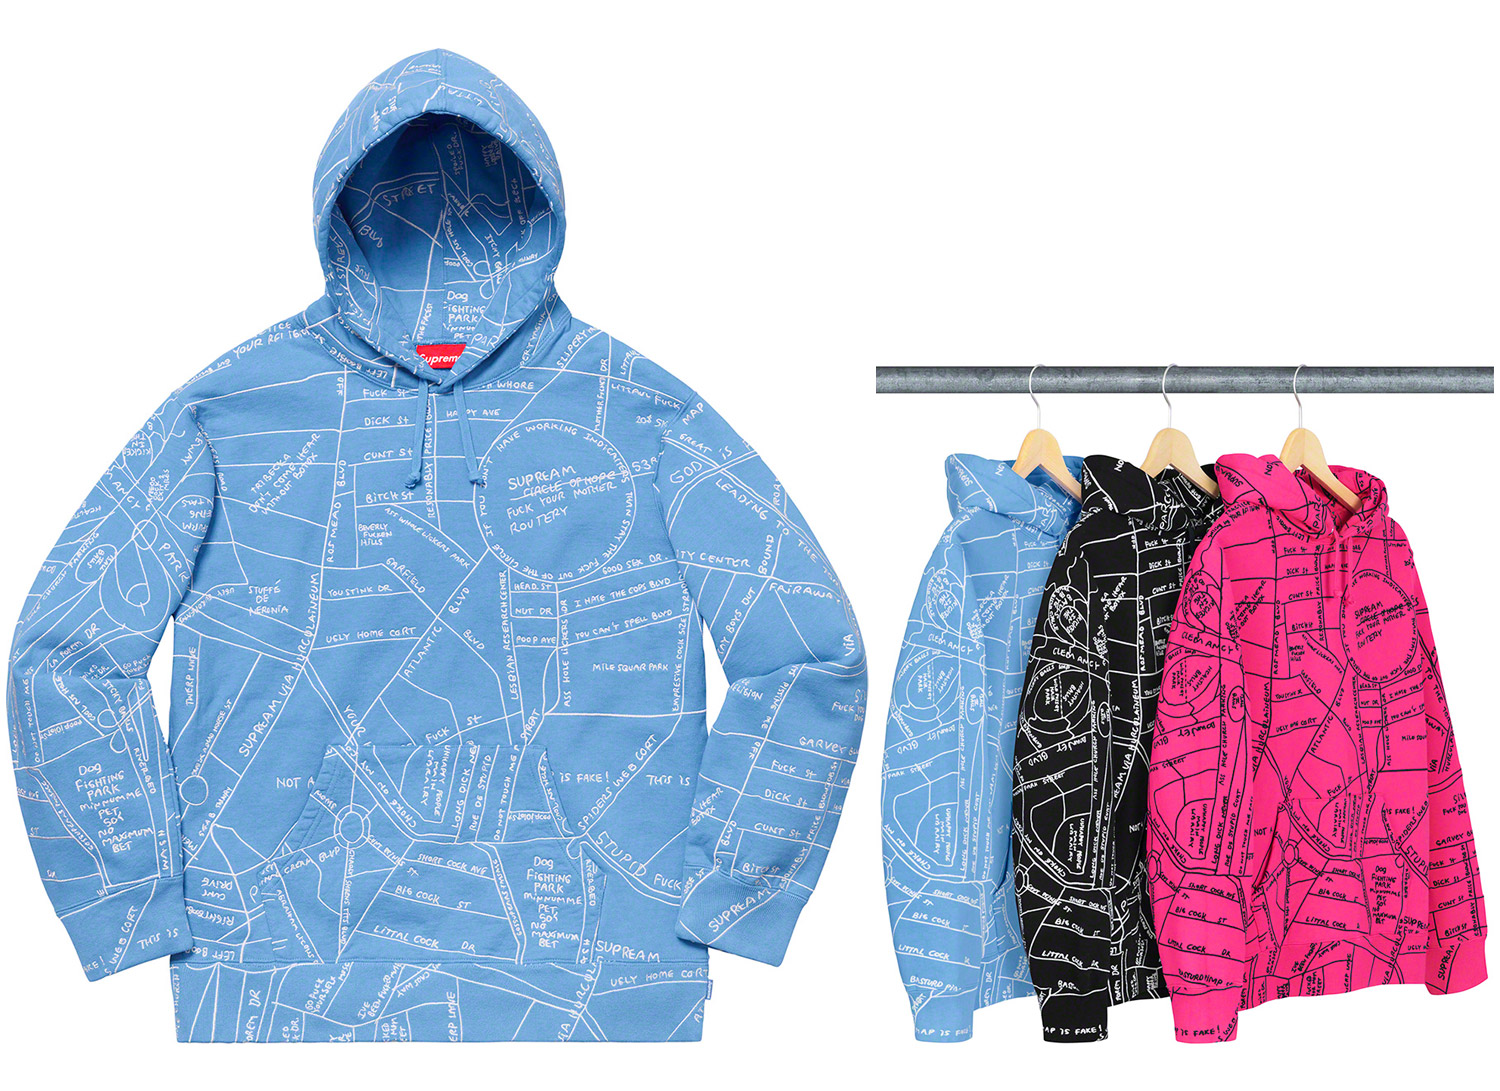 Gonz Embroidered Map Hooded Sweatshirt